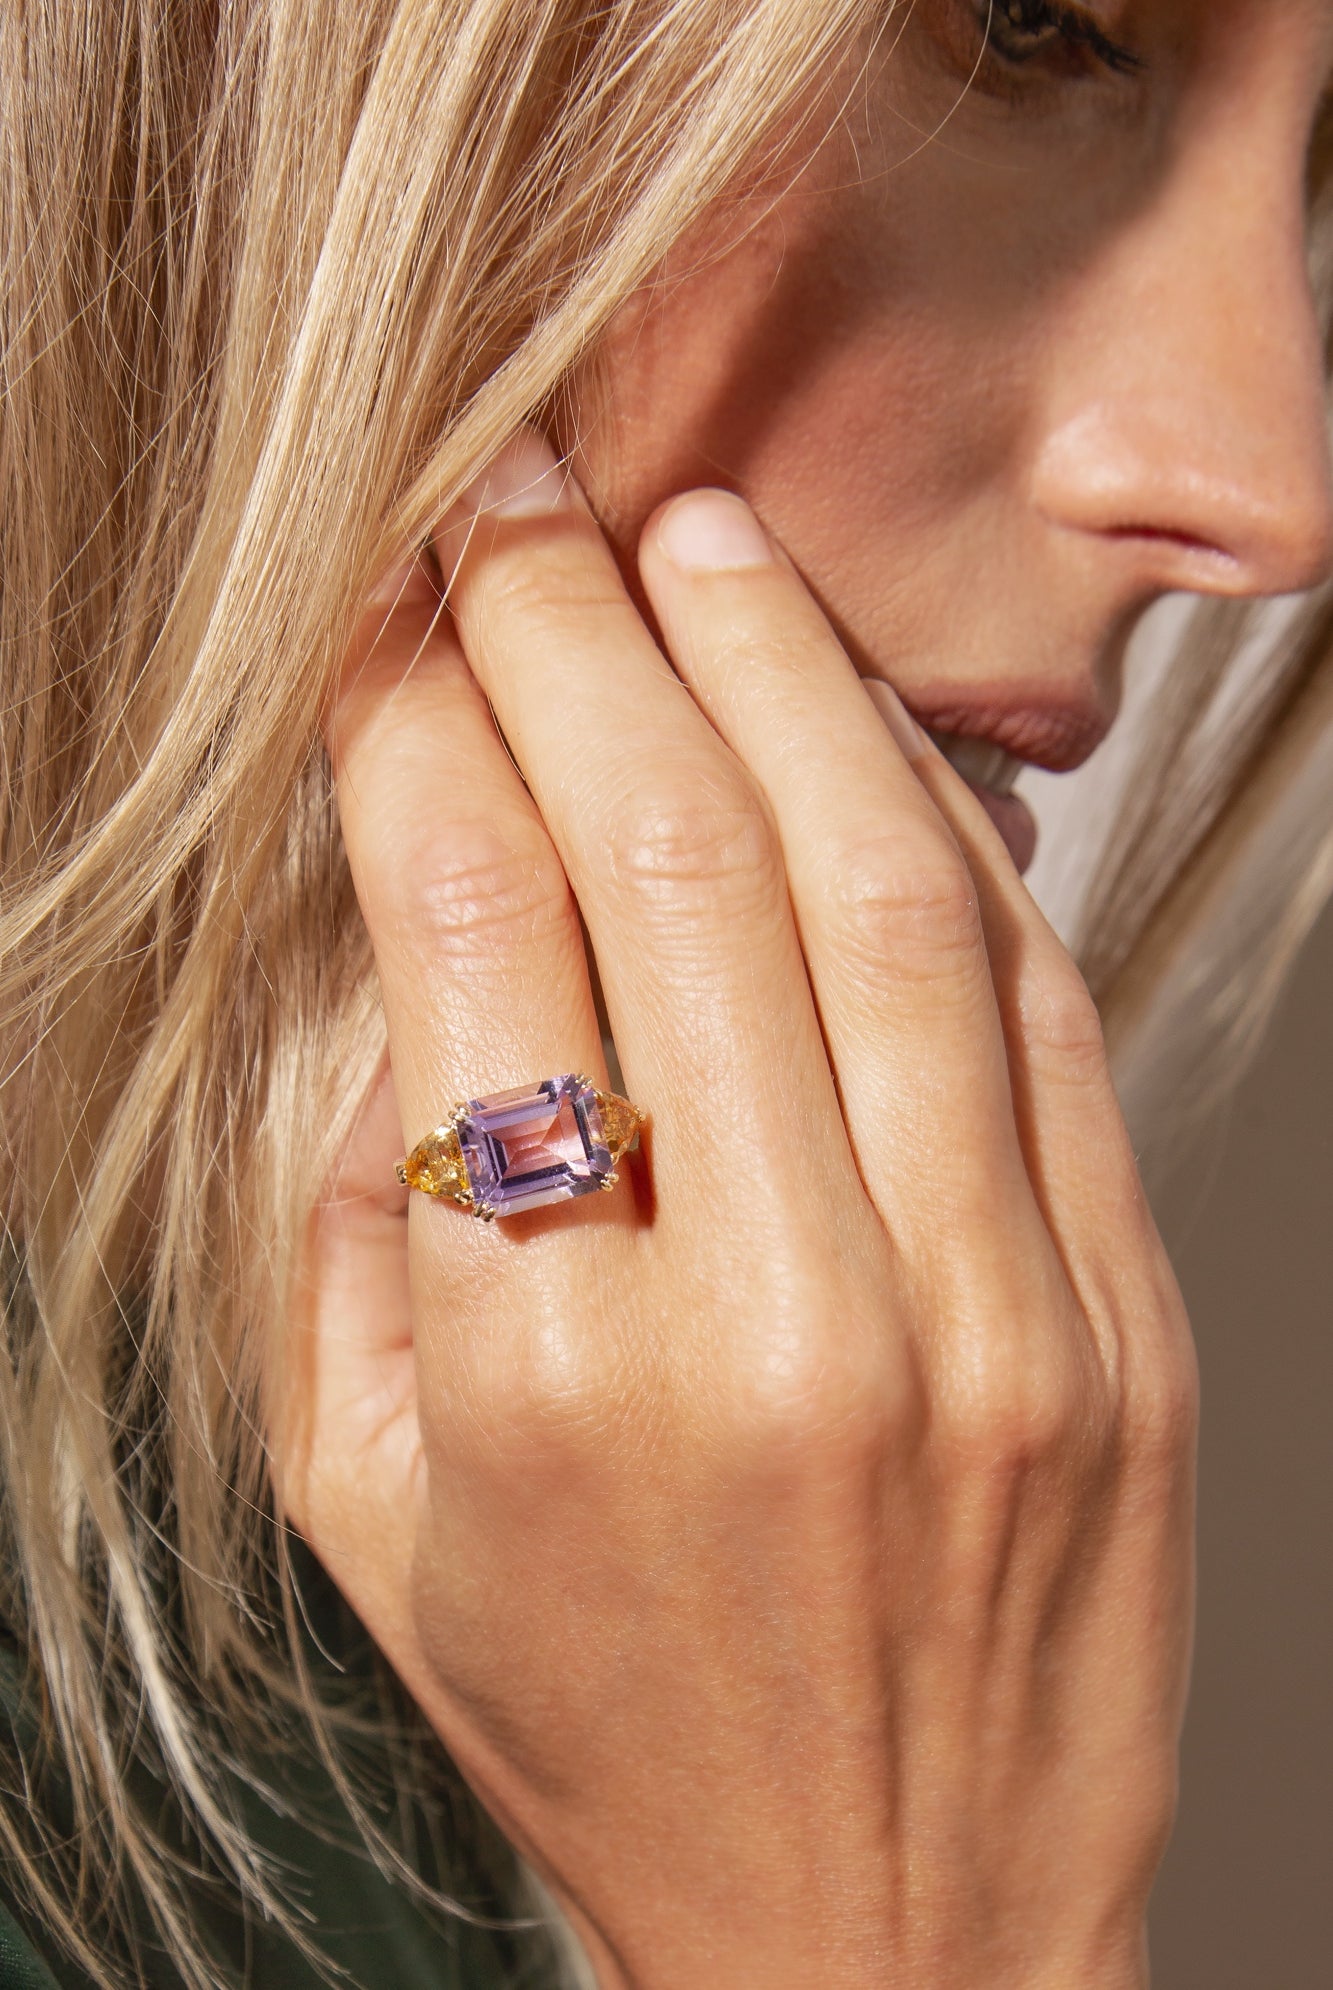 Modern gemstone jewelry. Amethyst and citrine cocktail ring.